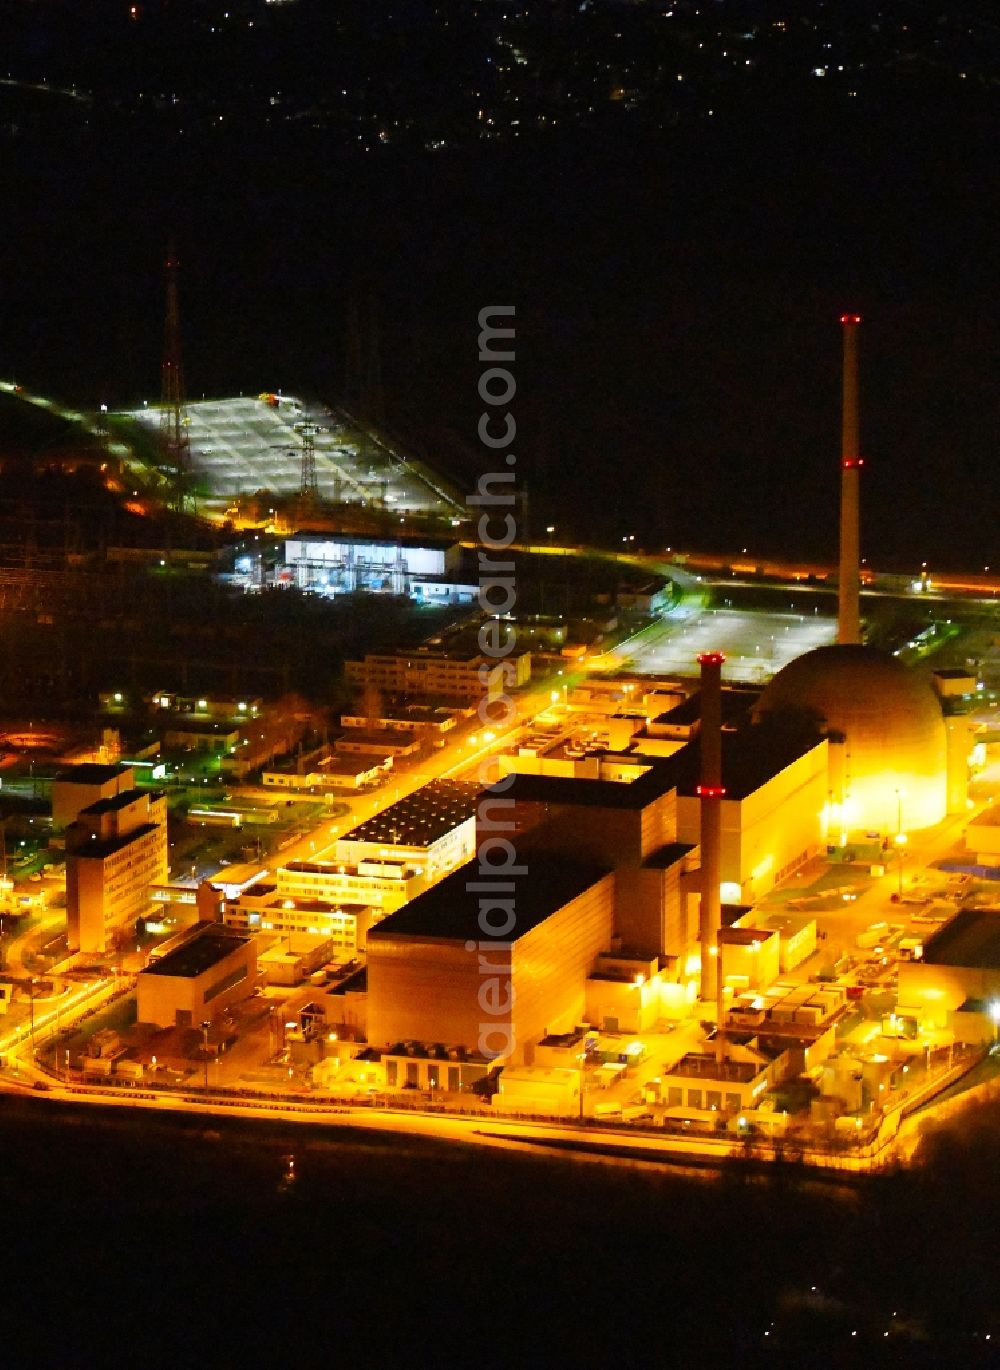 Aerial image at night Philippsburg - Night lighting building the partly decommissioned reactor units and systems of the NPP - NPP nuclear power plant EnBW Kernkraft GmbH, Kernkraftwerk Philippsburg in Philippsburg in the state Baden-Wurttemberg, Germany